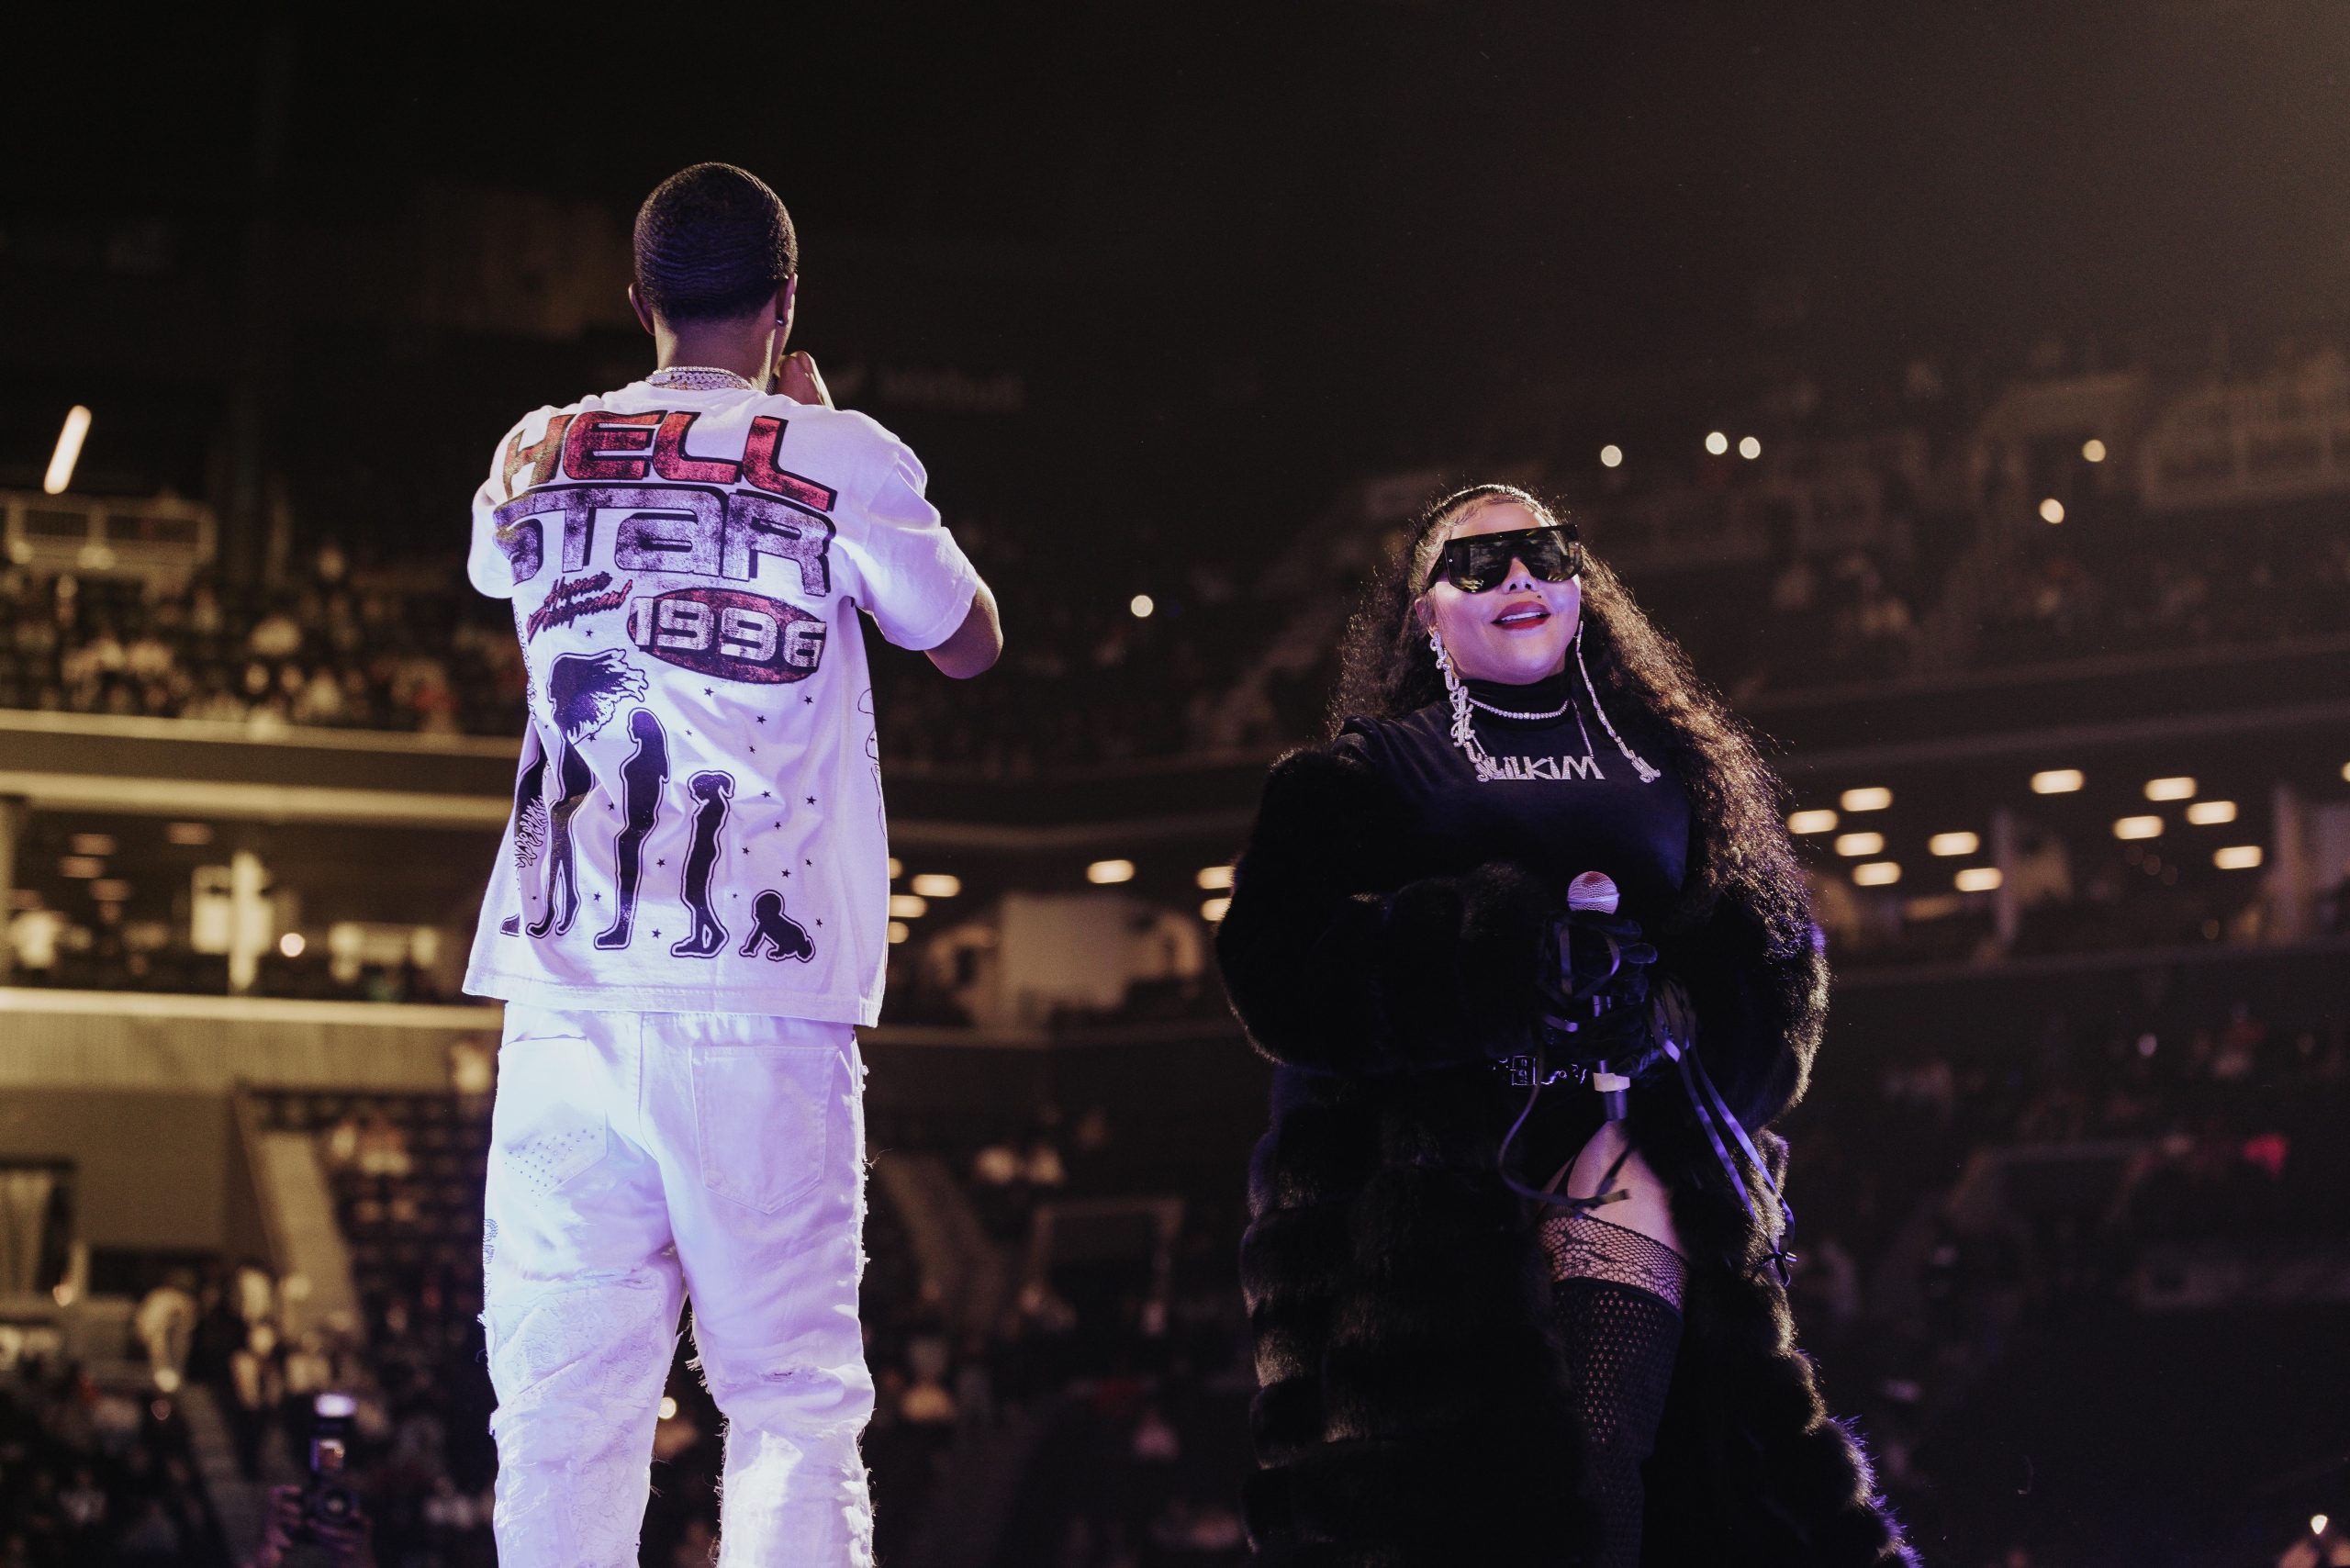 Lil Kim and King Combs onstage - Barclays December 30, 2022 - Photo Credit Henry Hwu